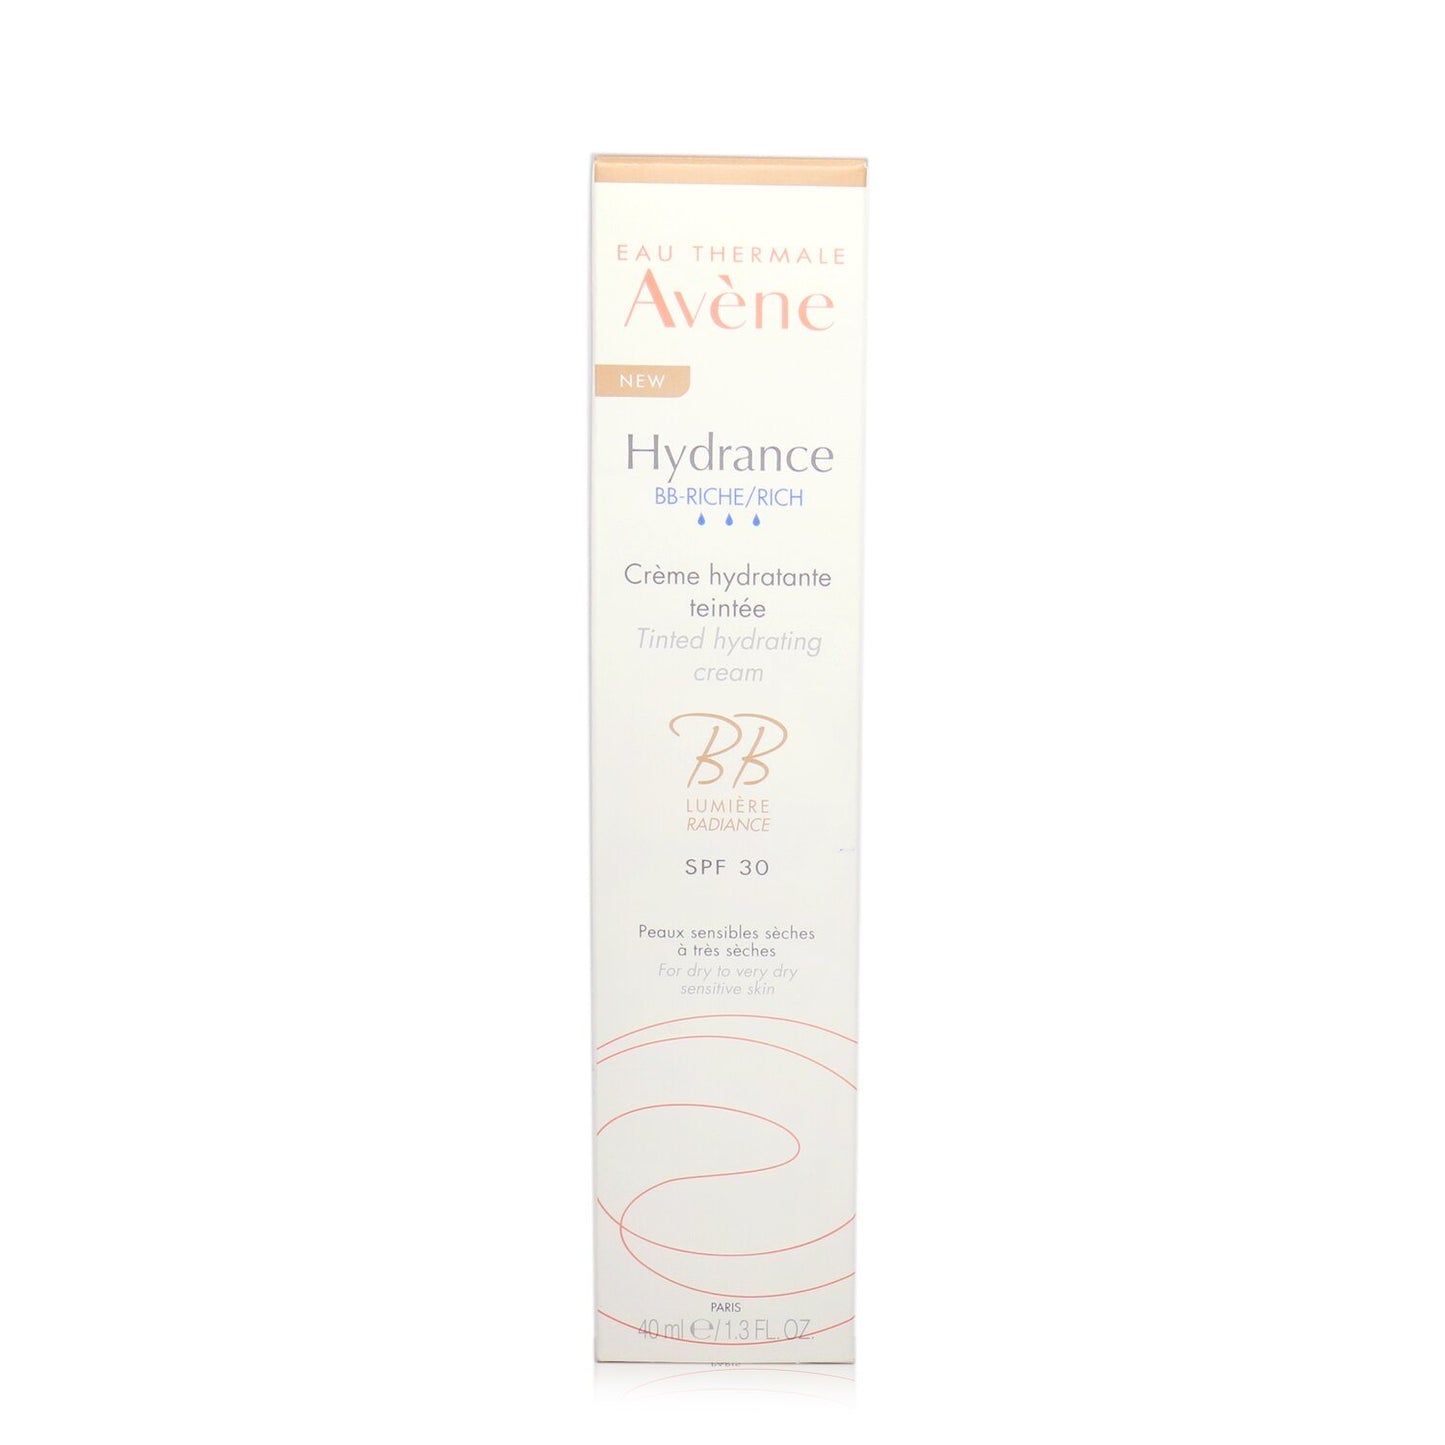 AVENE - Hydrance BB-RICH Tinted Hydrating Cream SPF 30 - For Dry to Very Dry Sensitive Skin 40ml/1.3oz